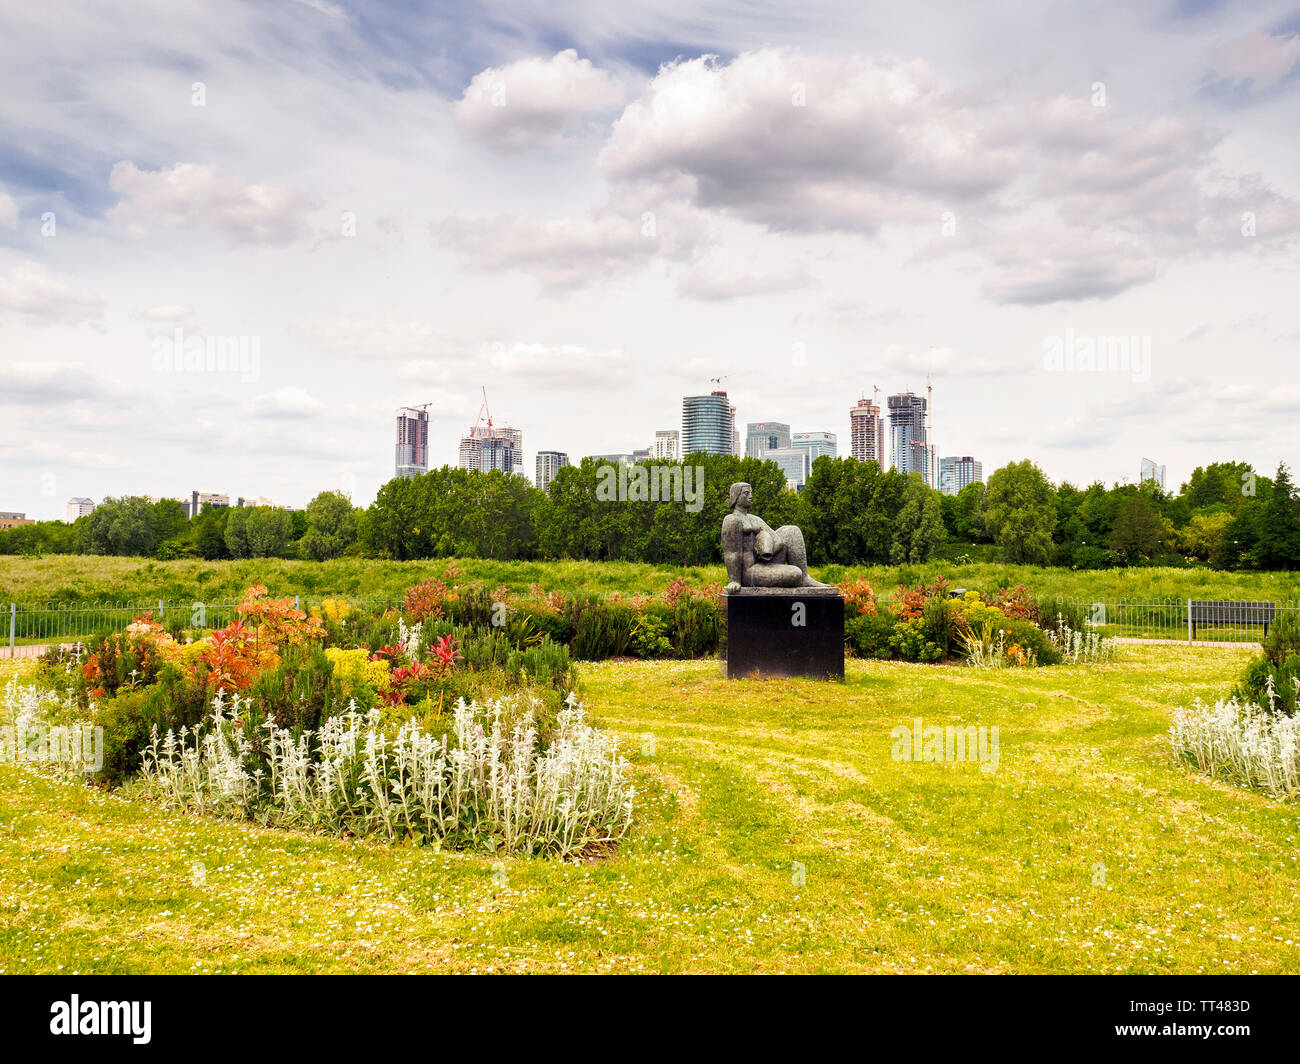 A replica of Woman with Fish by Frank Dobson in Millwall Park - Isle of Dogs, London Stock Photo